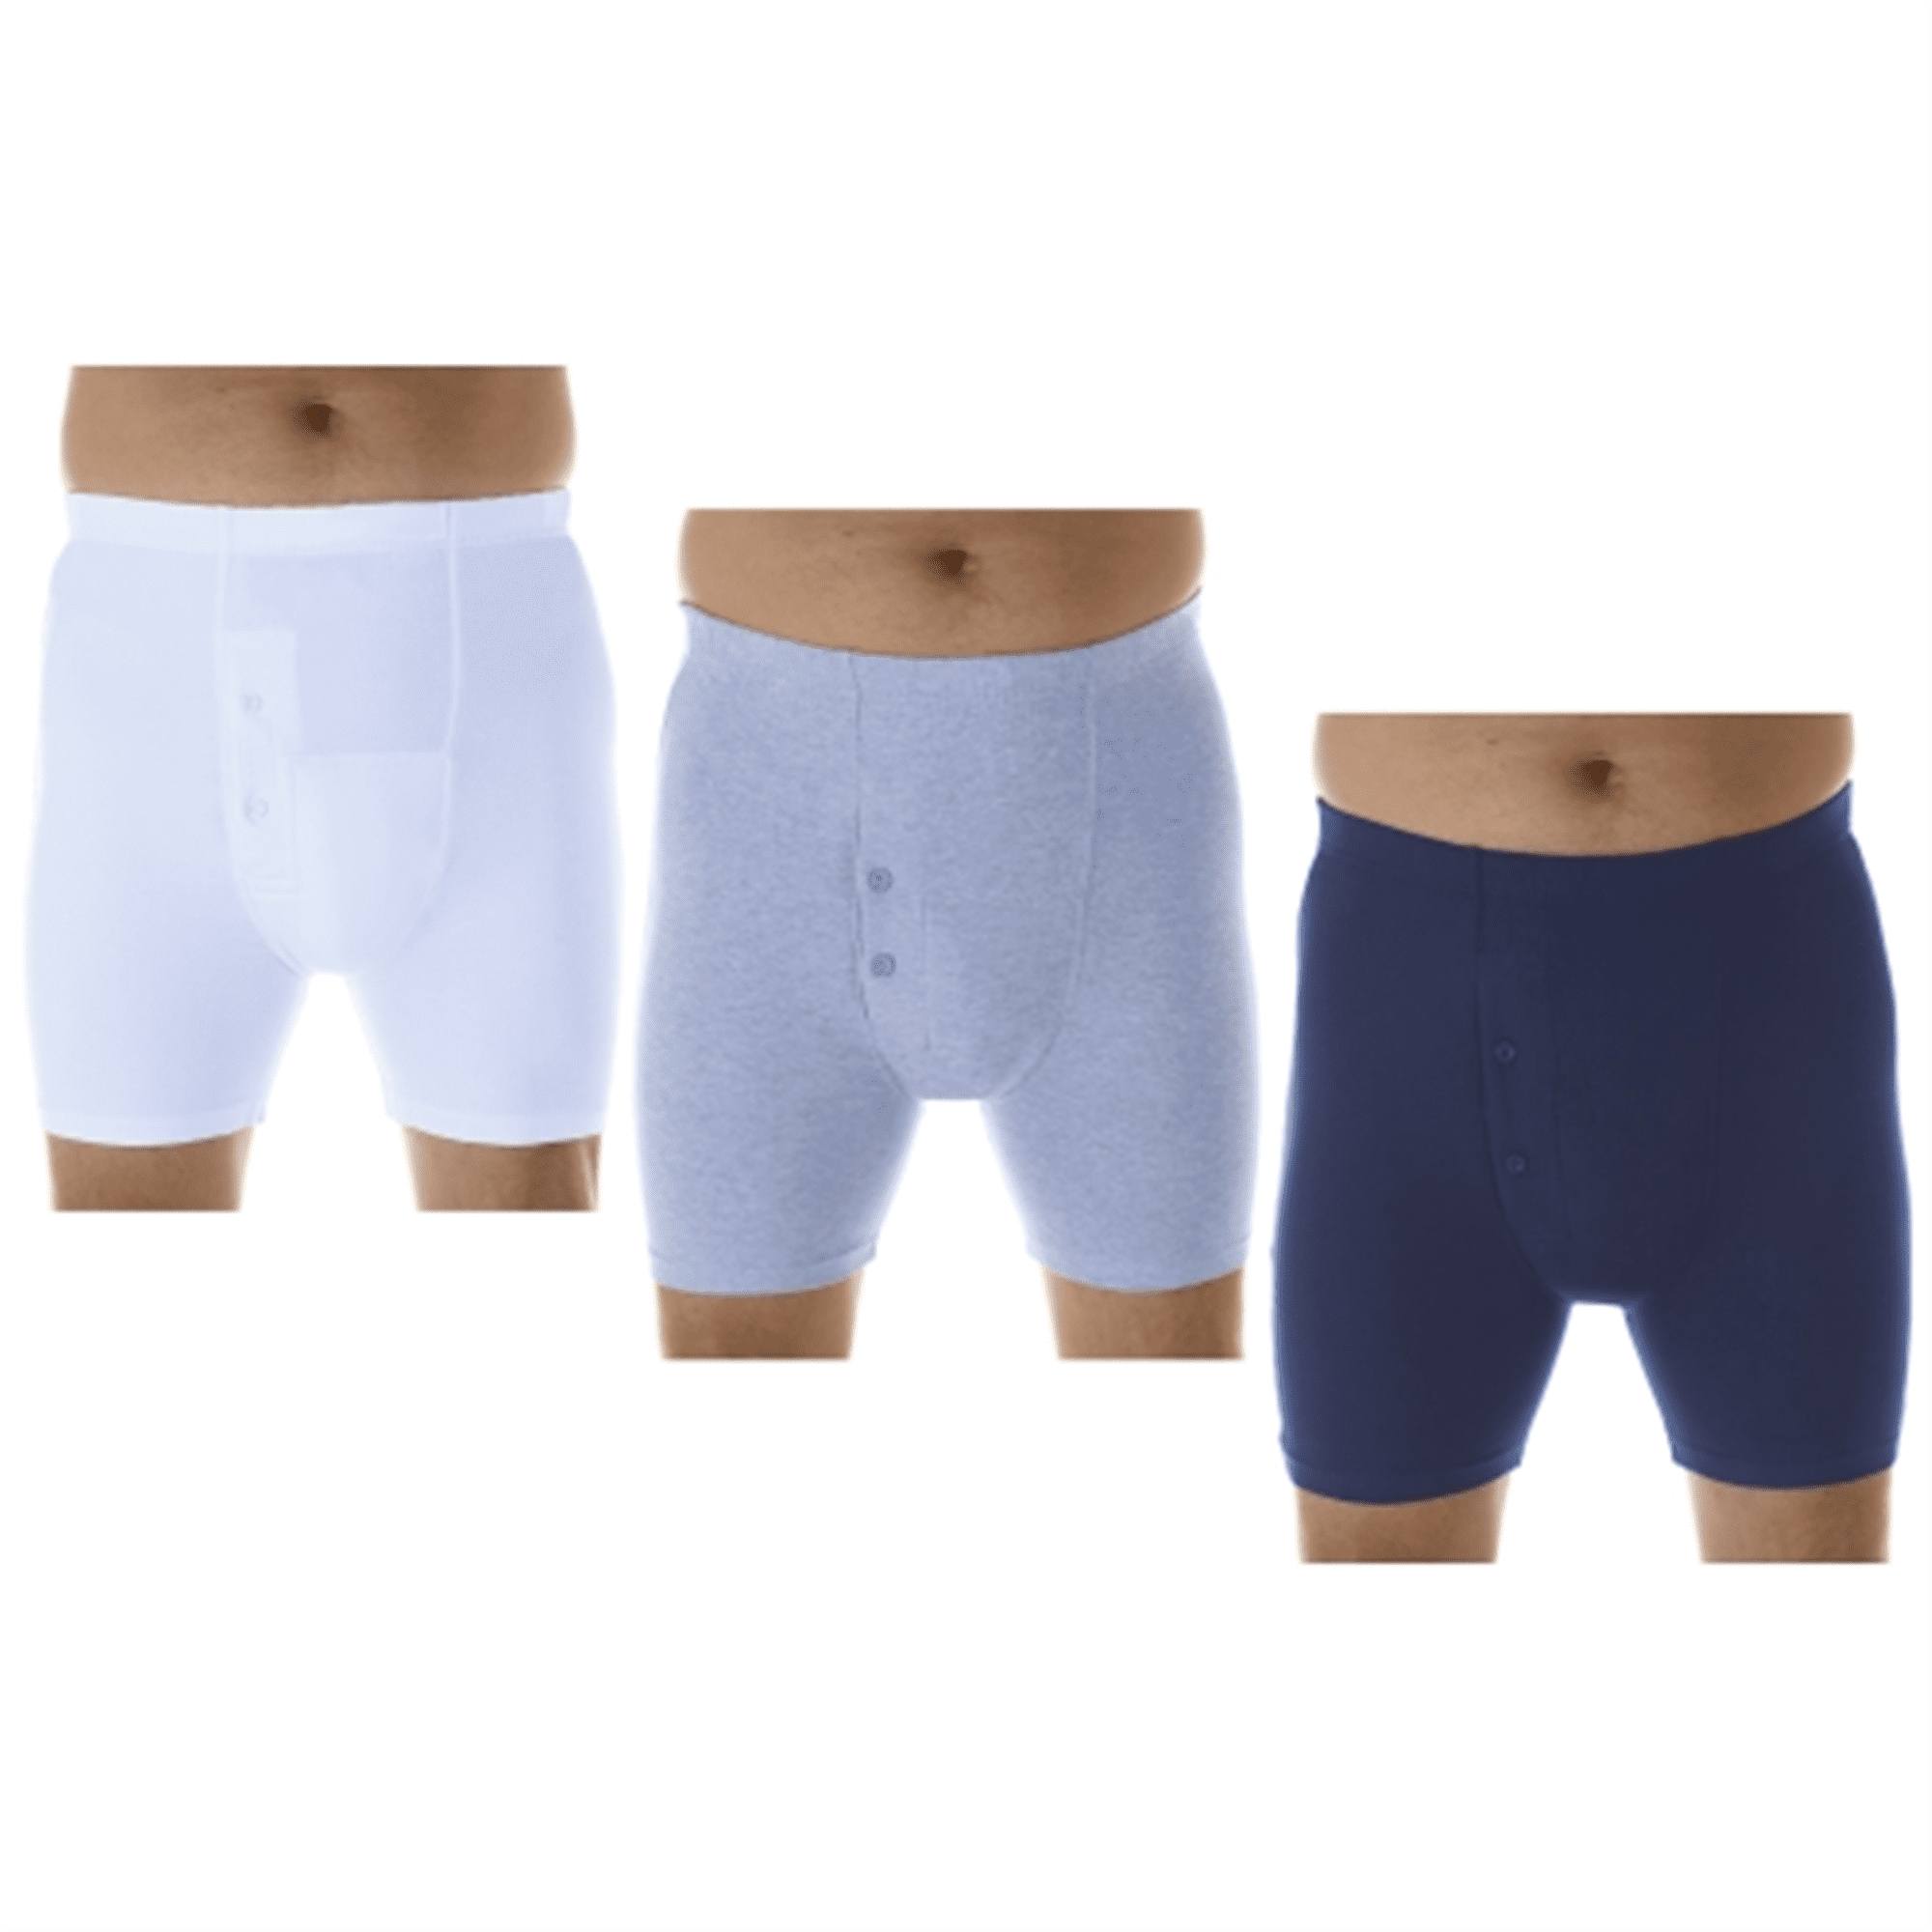 Washable Men's Incontinence Boxer Briefs with Oman | Ubuy